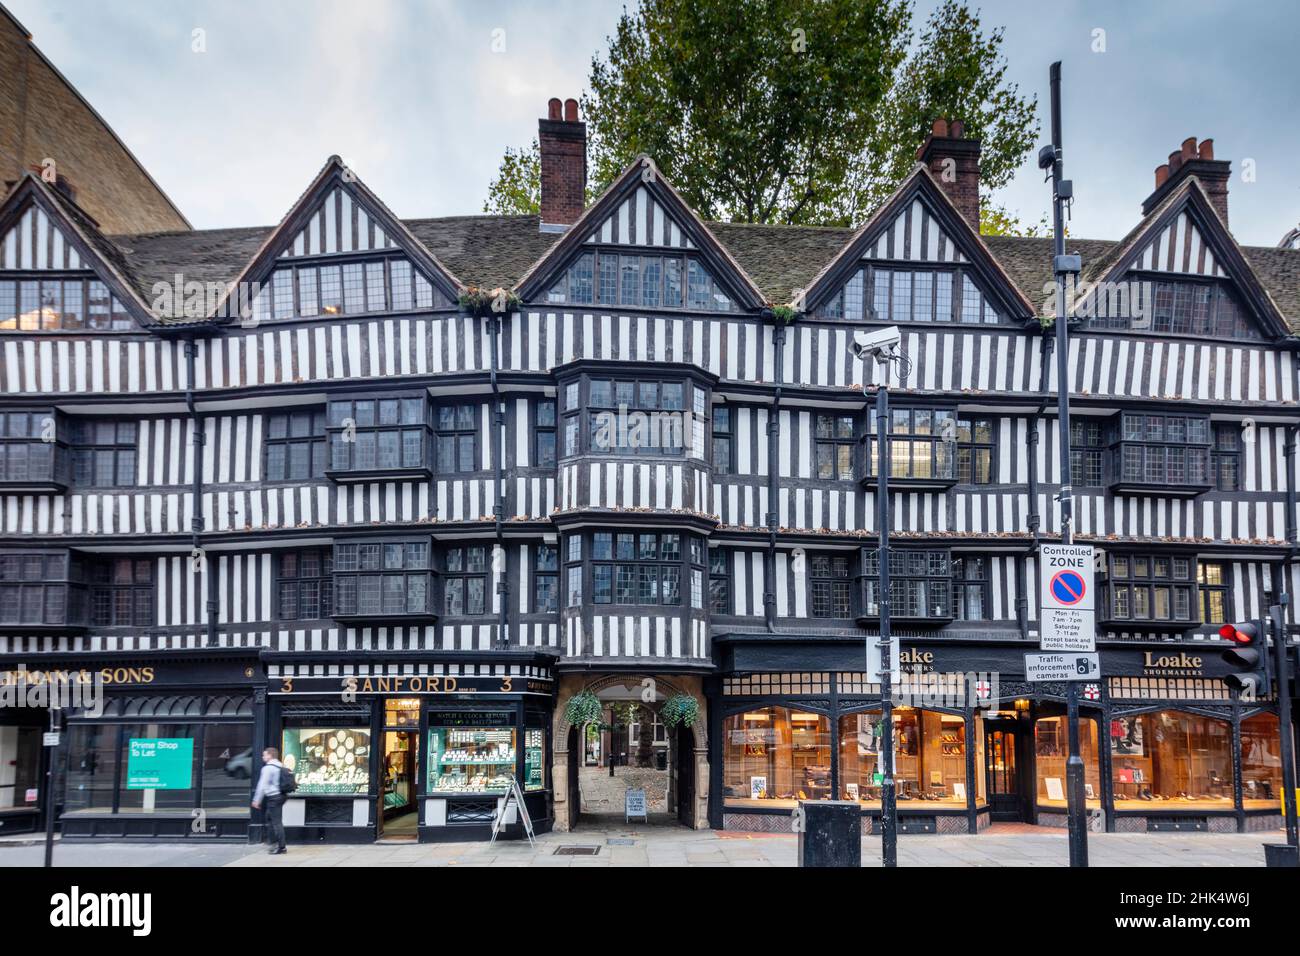 The 16th Century Tudor buildings at Staple Inn on High Holborn, home to shops and barristers' legal chambers, London, England, United Kingdom, Europe Stock Photo